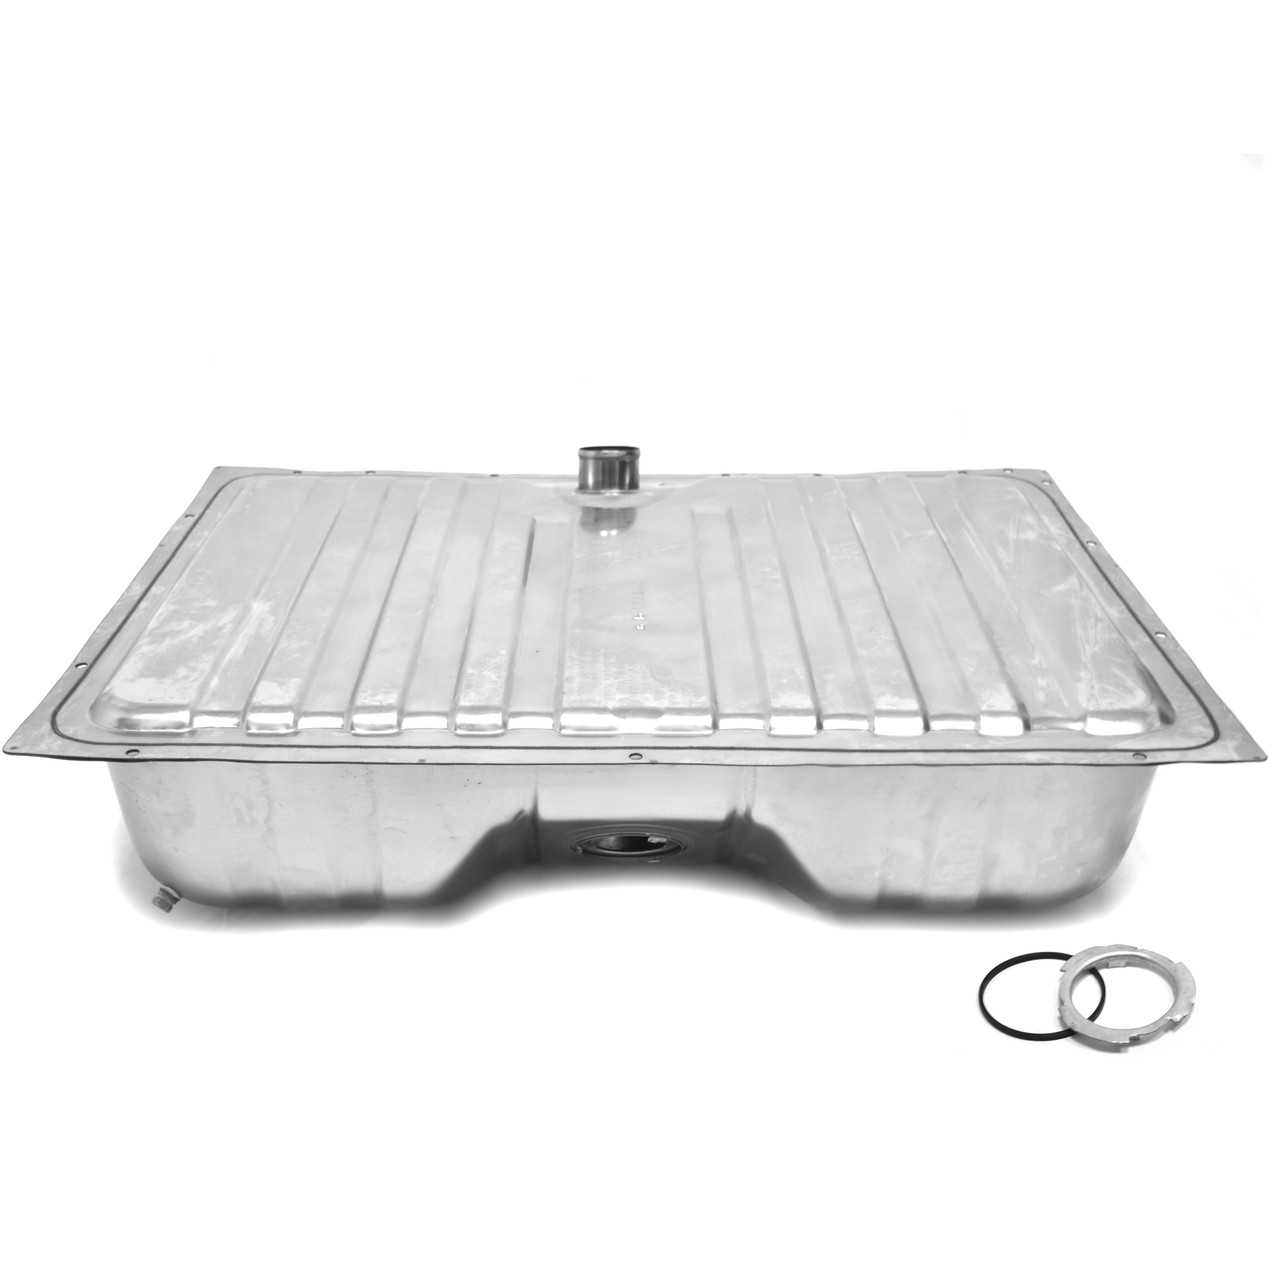 Fuel Tank With Drain 16 Gallon Stainless Steel [FM-EG003SS]